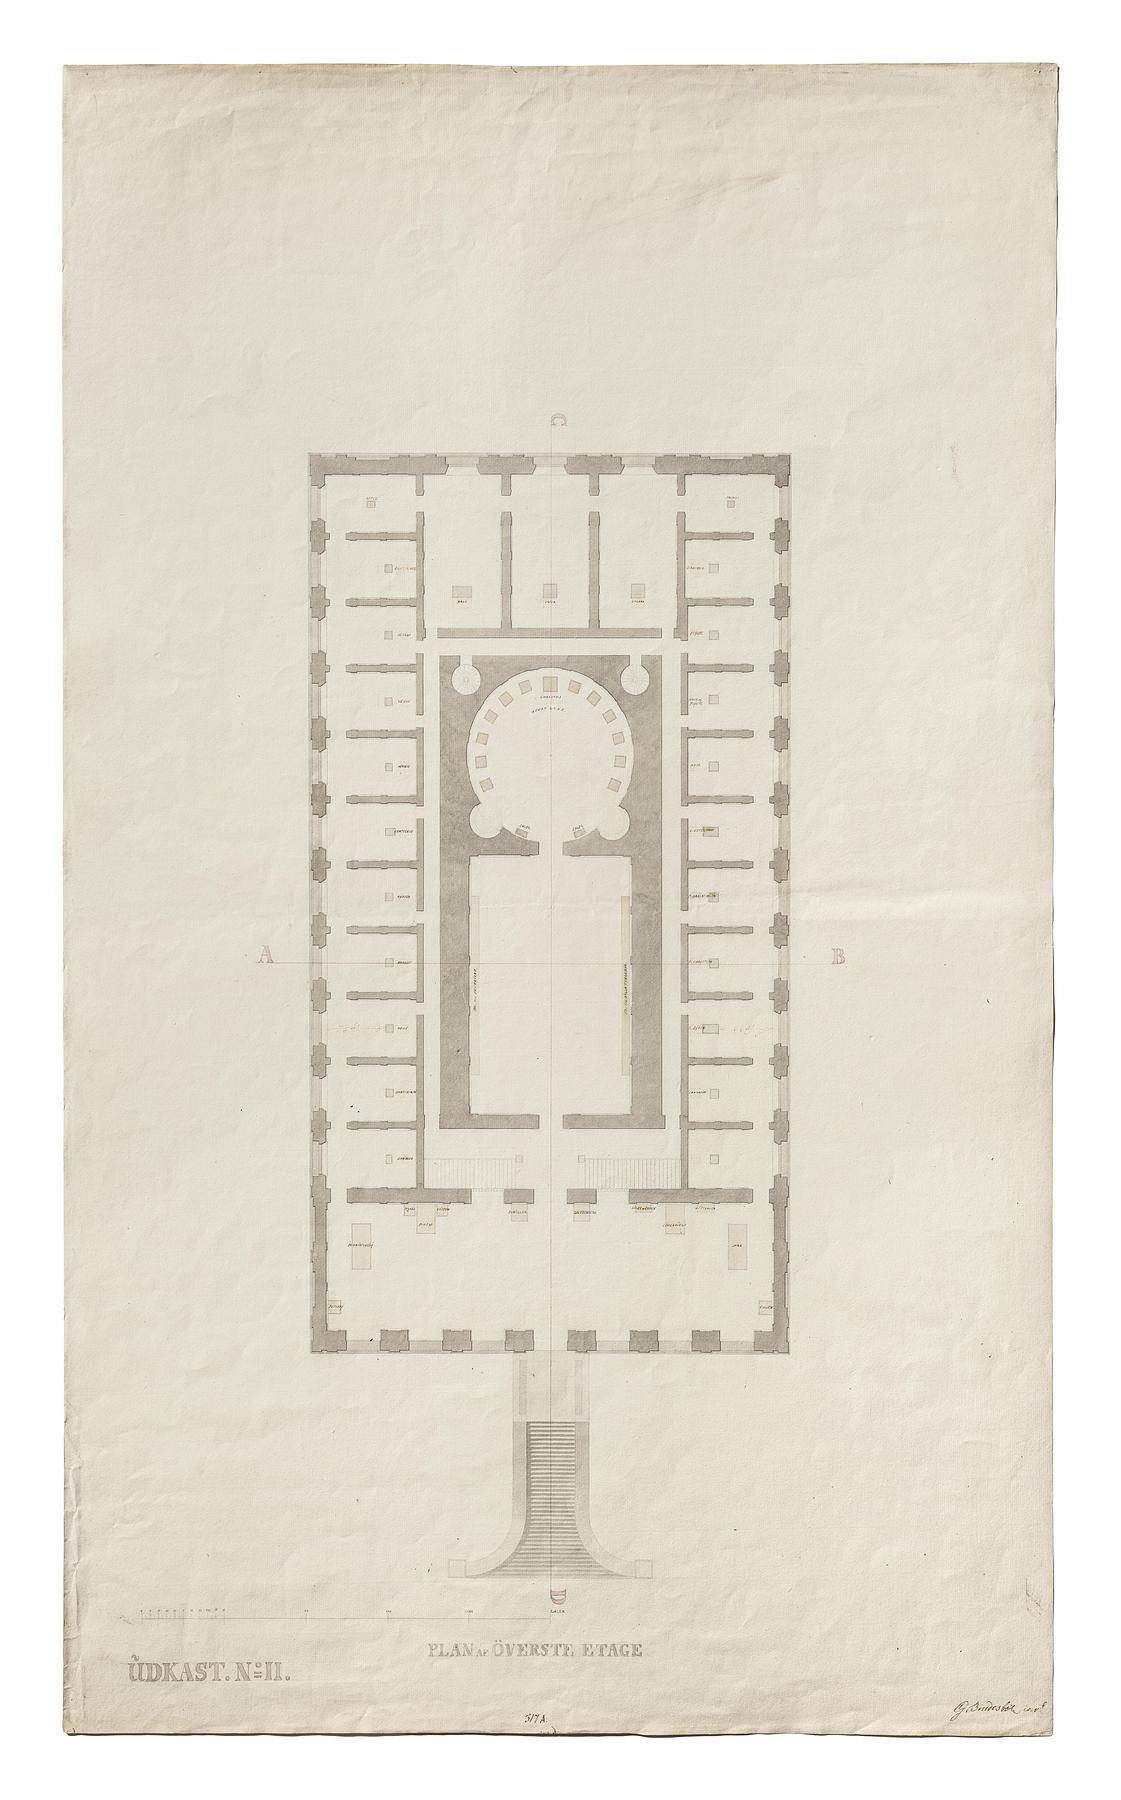 Thorvaldsens Museum, Sketch No. 2 for the First Floor Plan, D1612